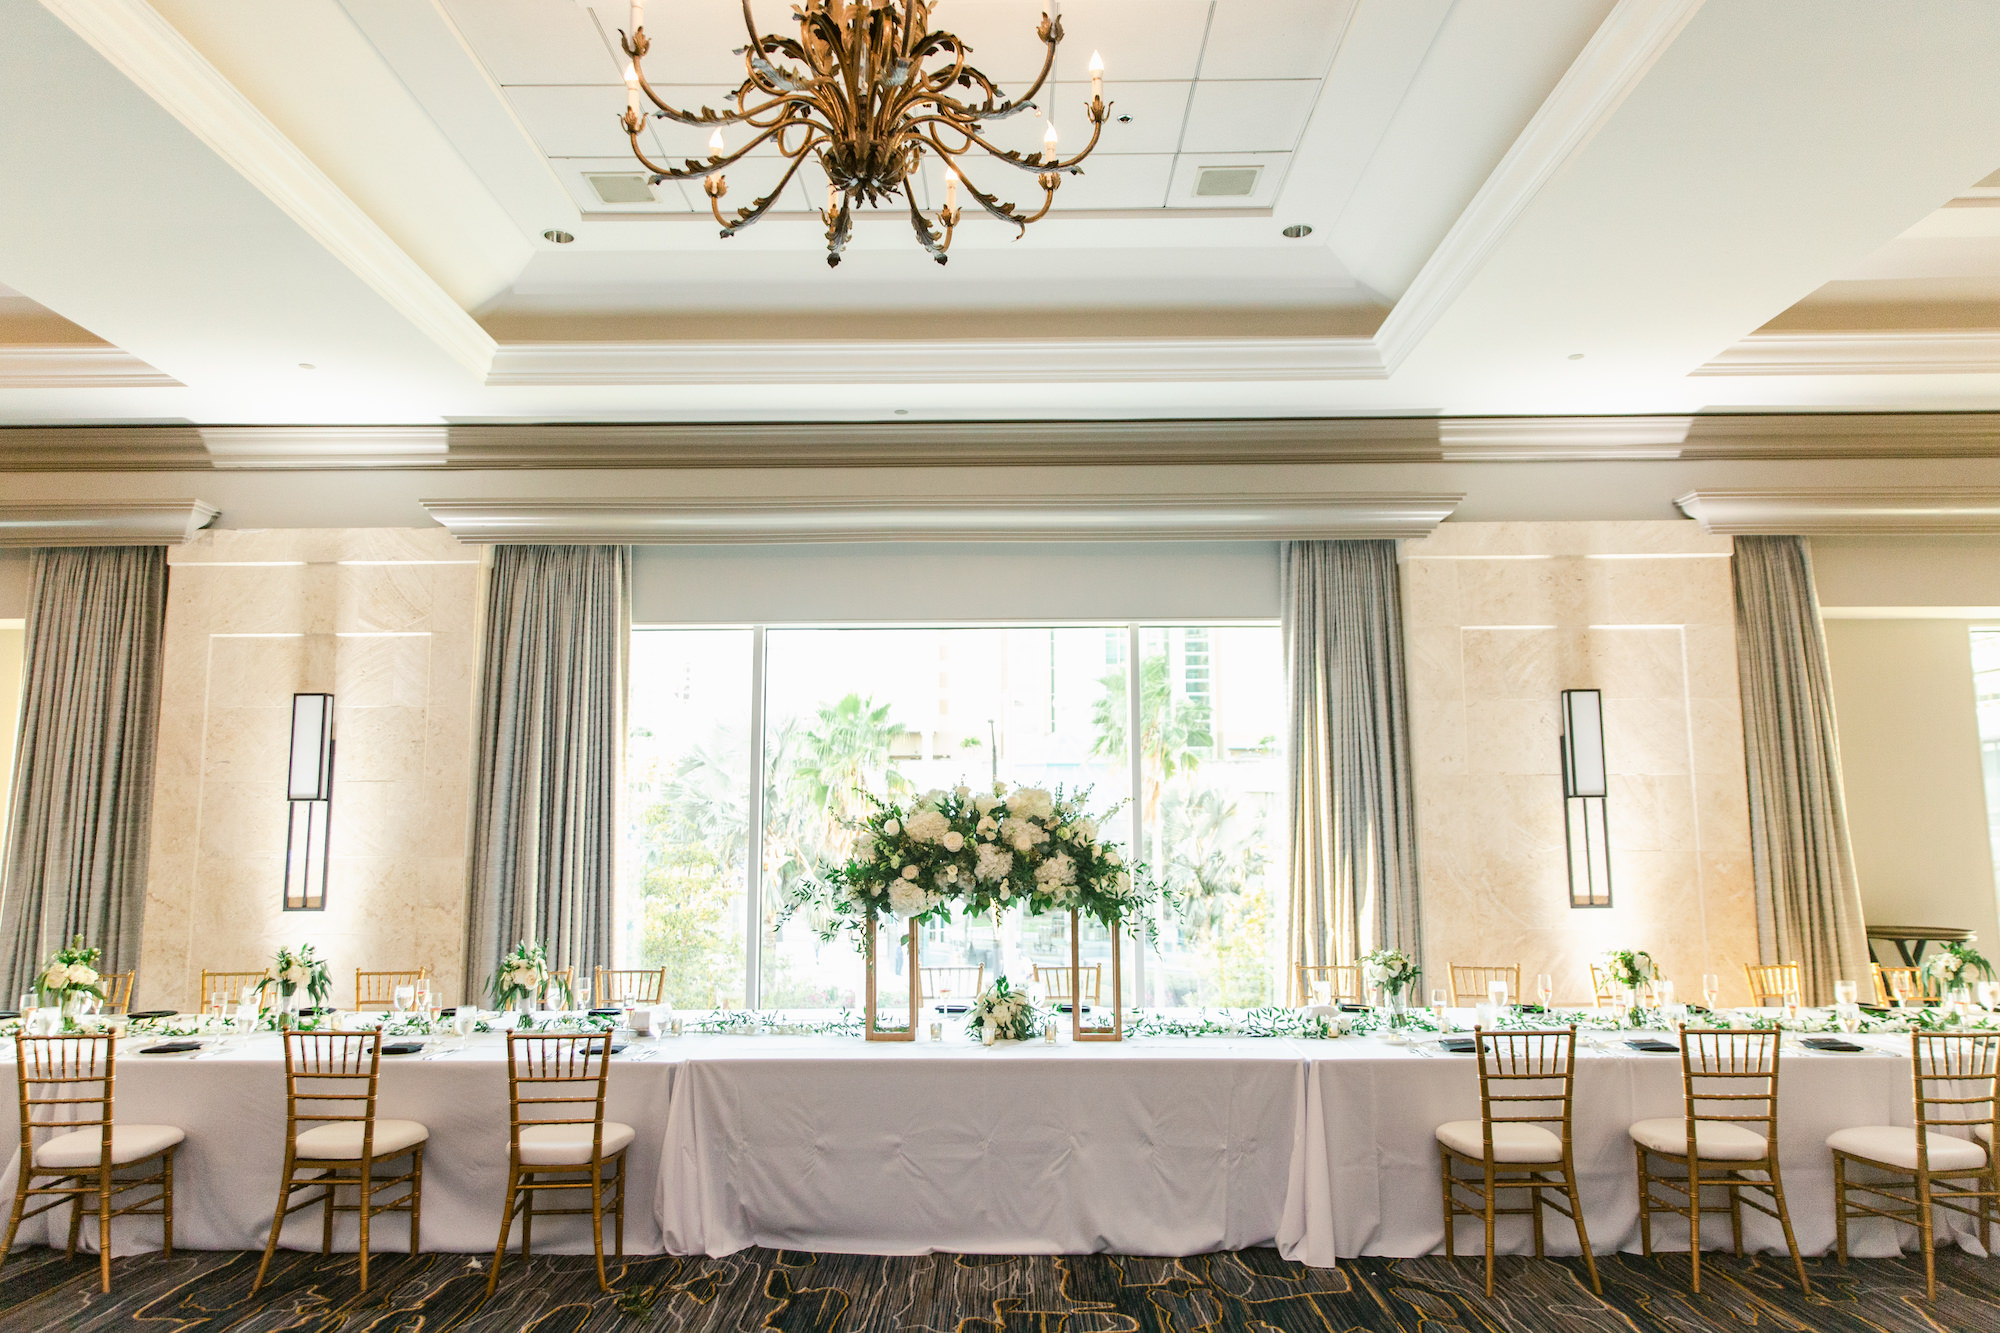 Classic Wedding Reception Decor, Head Table with Tall Floral Centerpieces, Greenery with White Flowers on Rectangular Stands, Chiavari Chairs | Tampa Bay Wedding Florist Save The Date | Kate Ryan Event Rentals | Planner EventFull Weddings